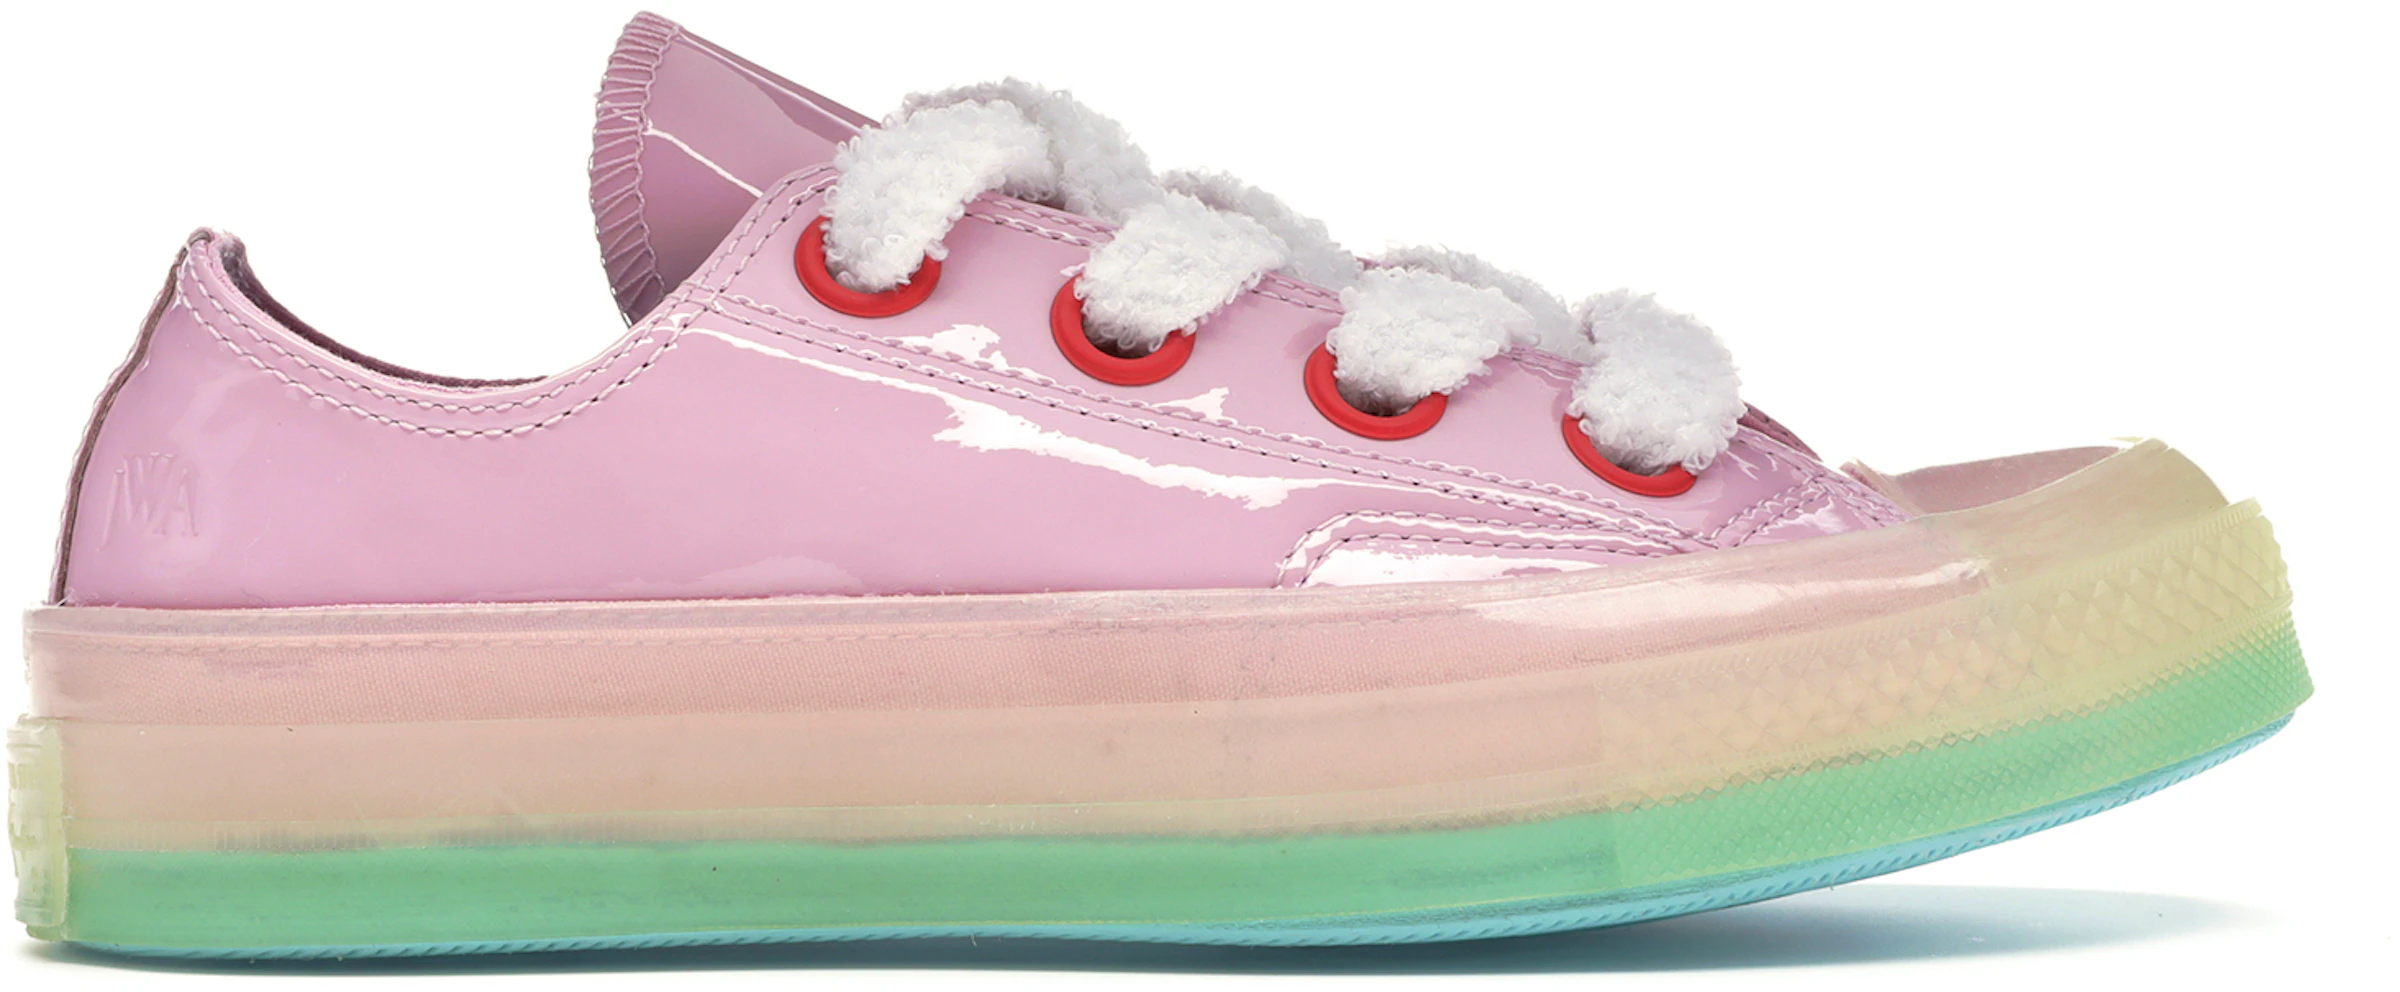 Chuck Taylor All-Star Ox JW Anderson Pink - 162289C -